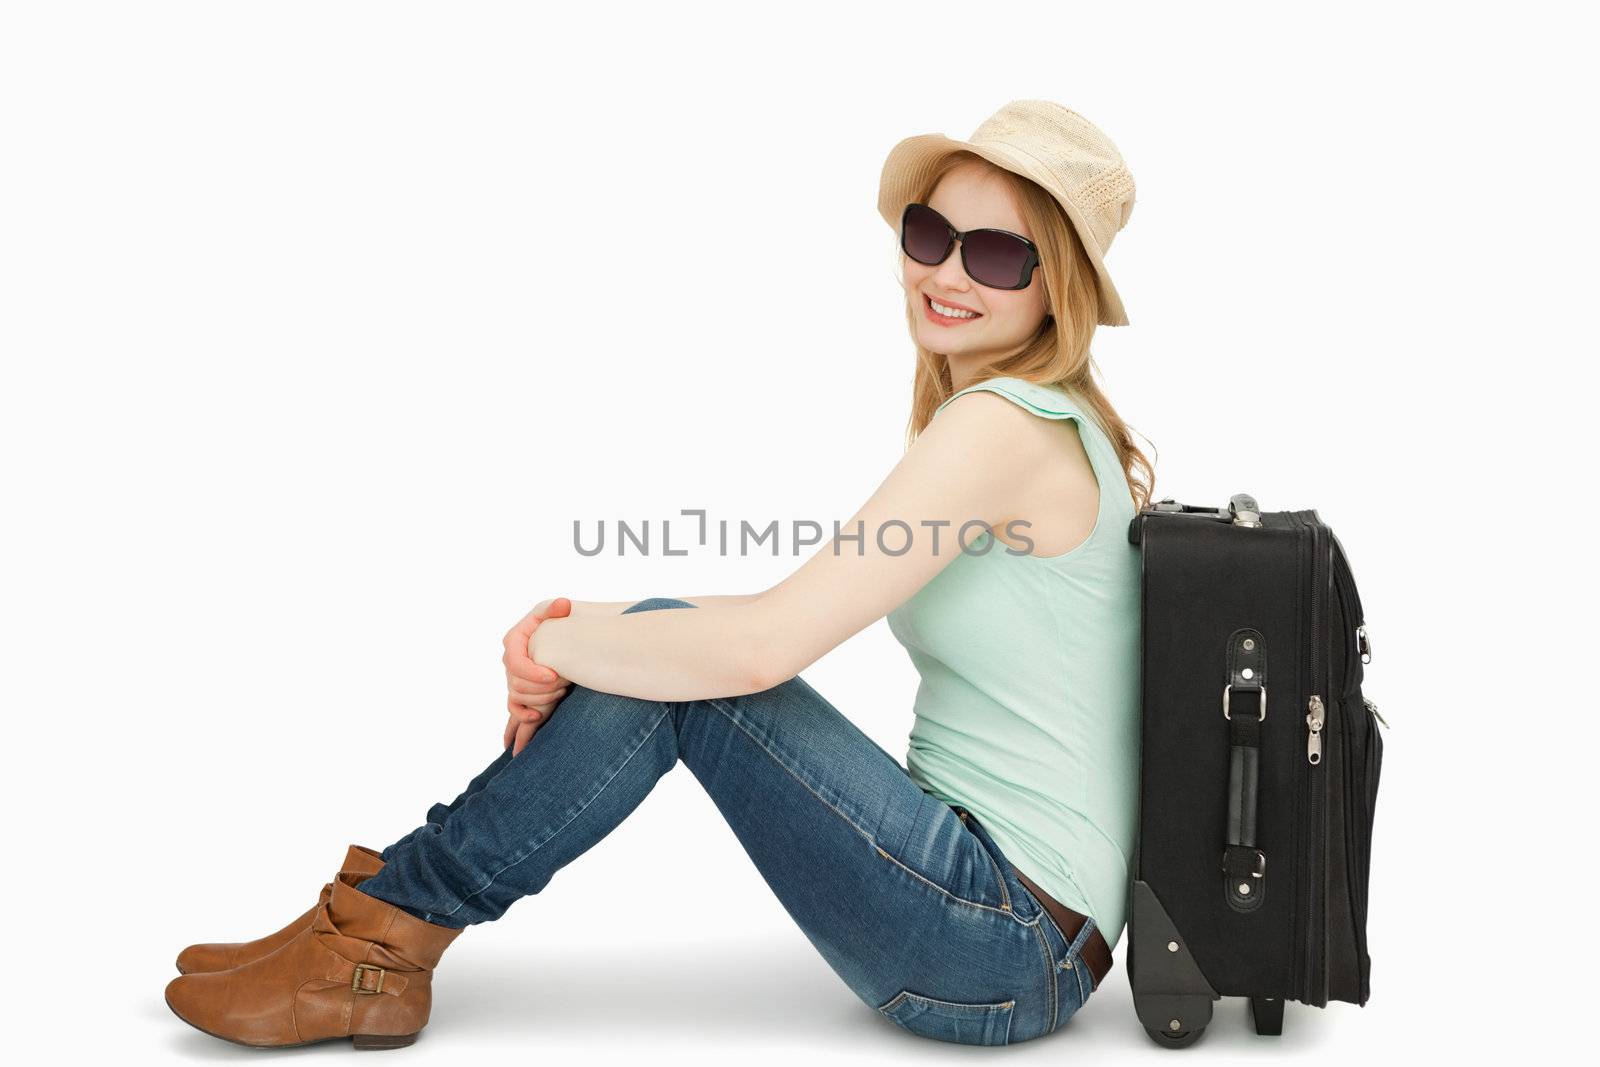 Woman wearing sunglasses while sitting near a suitcase against white background